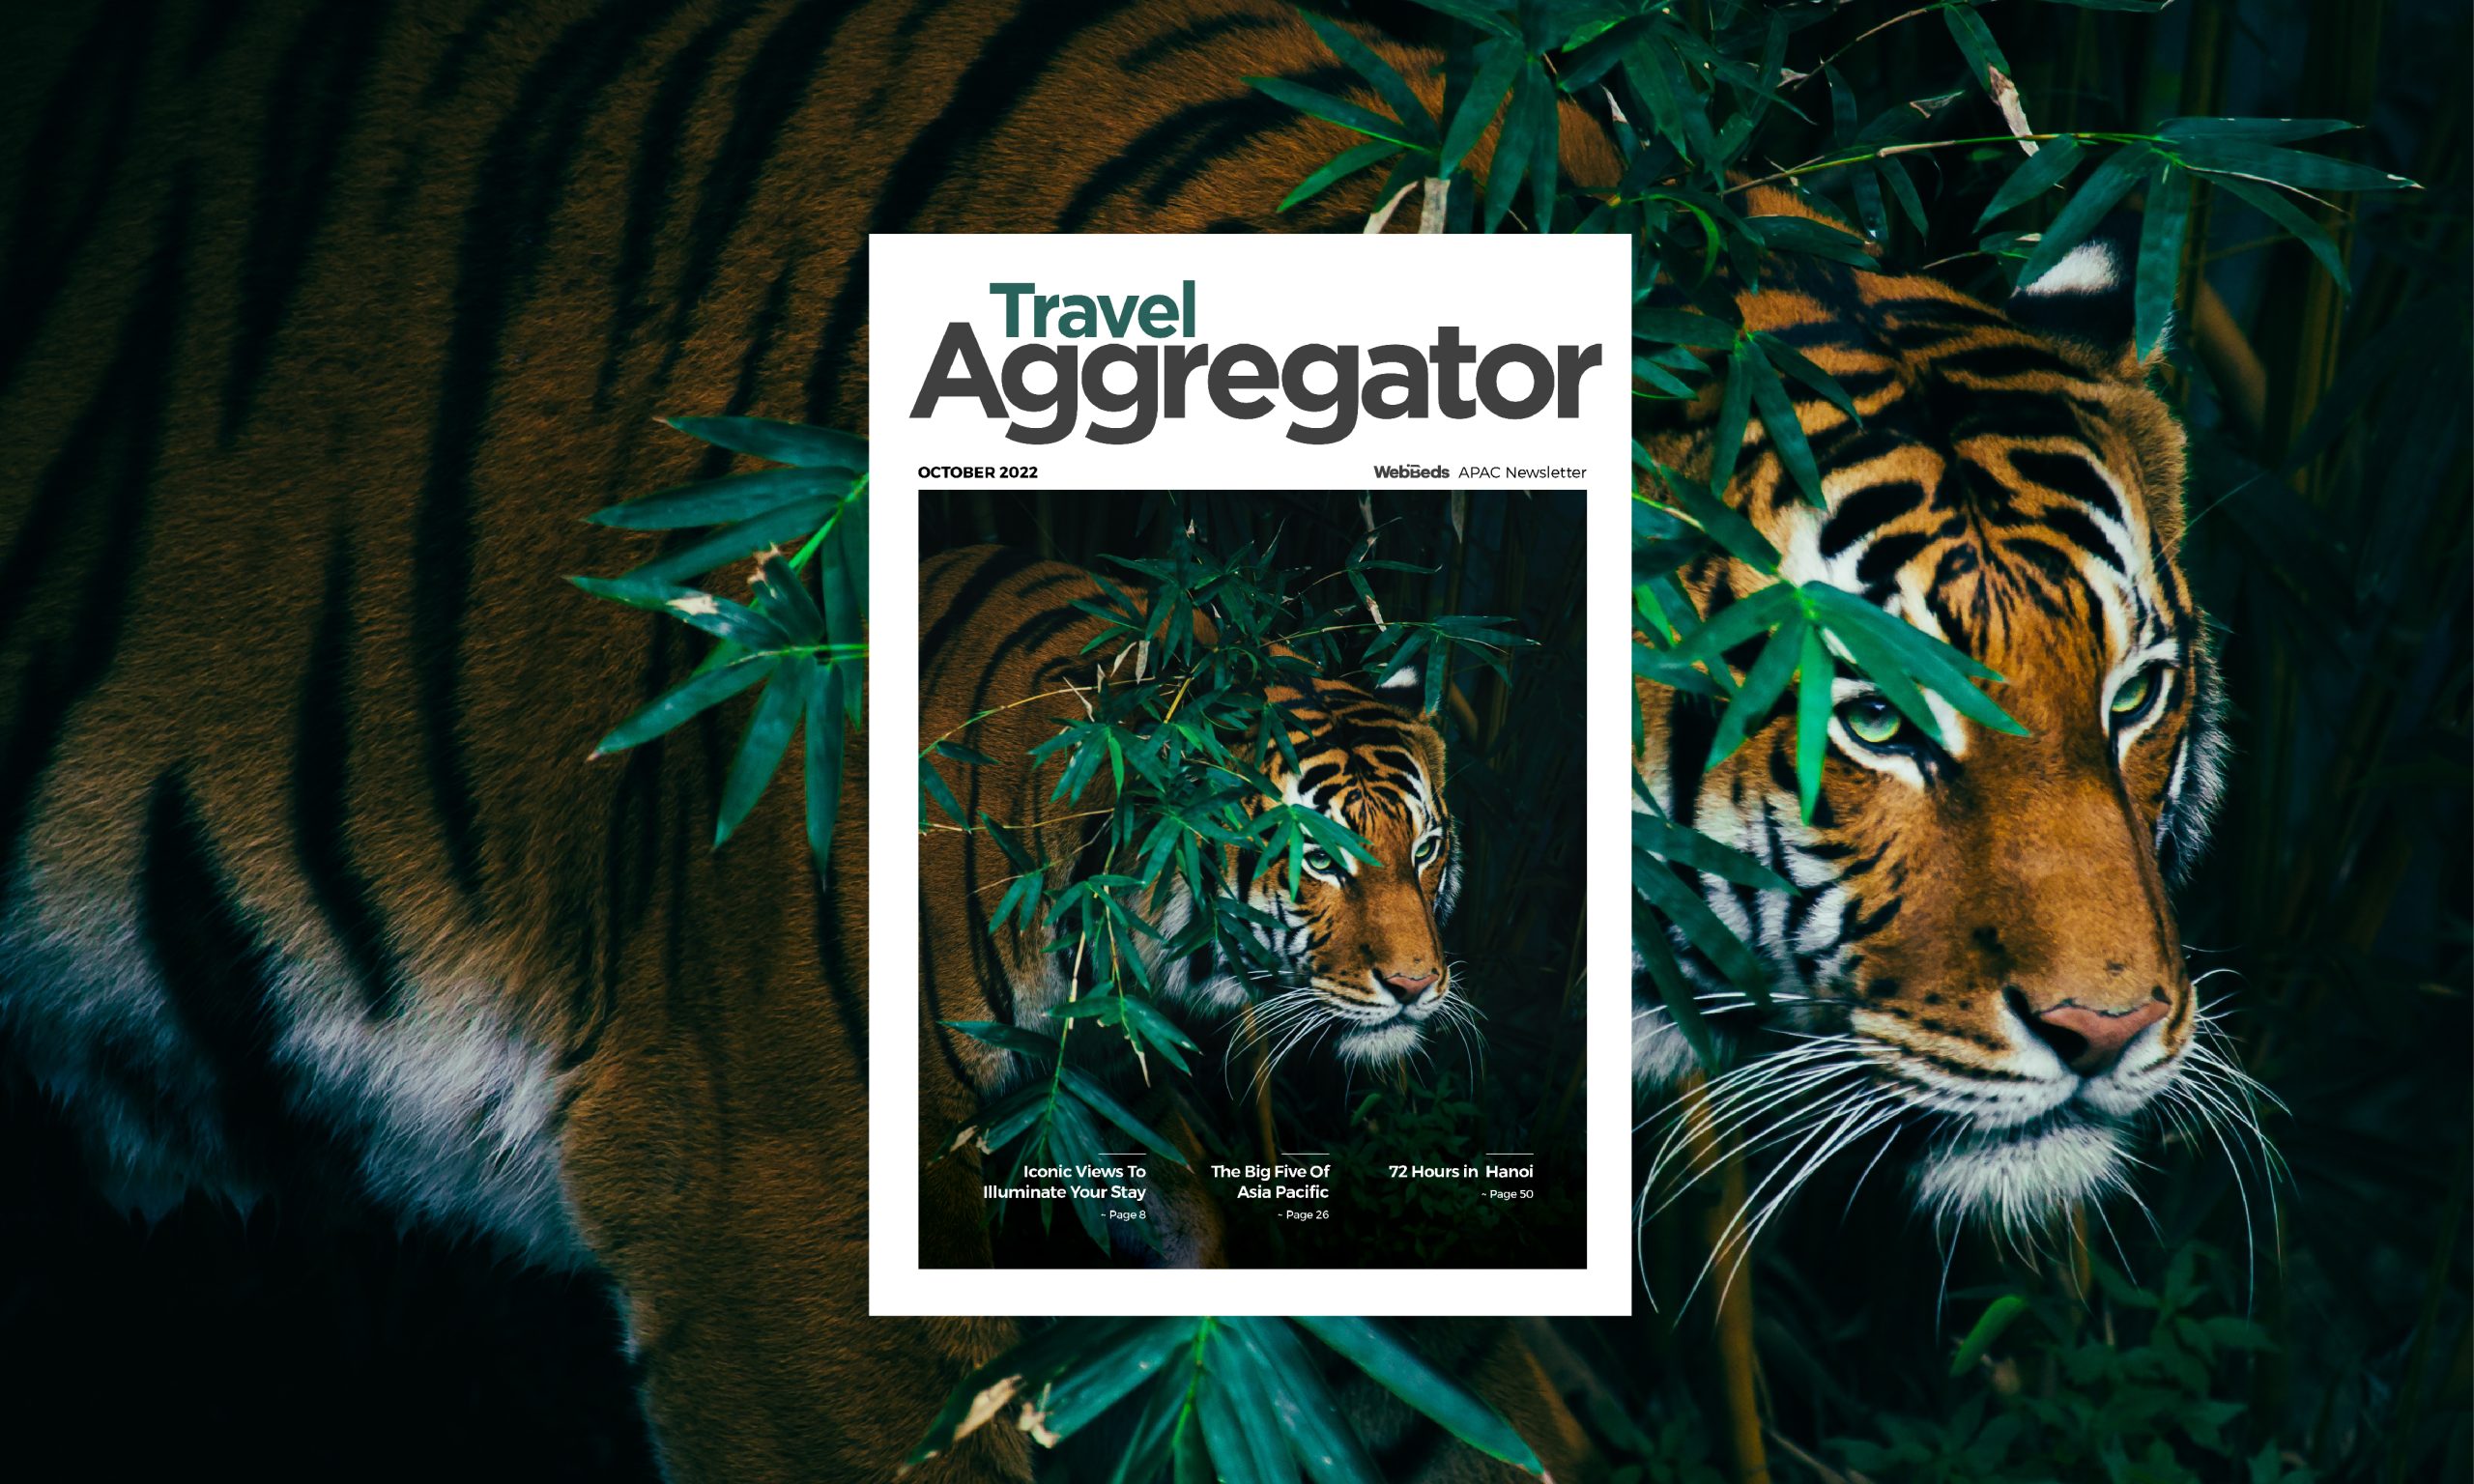 Travel Aggregator Magazine – October 2022 Edition Out Now